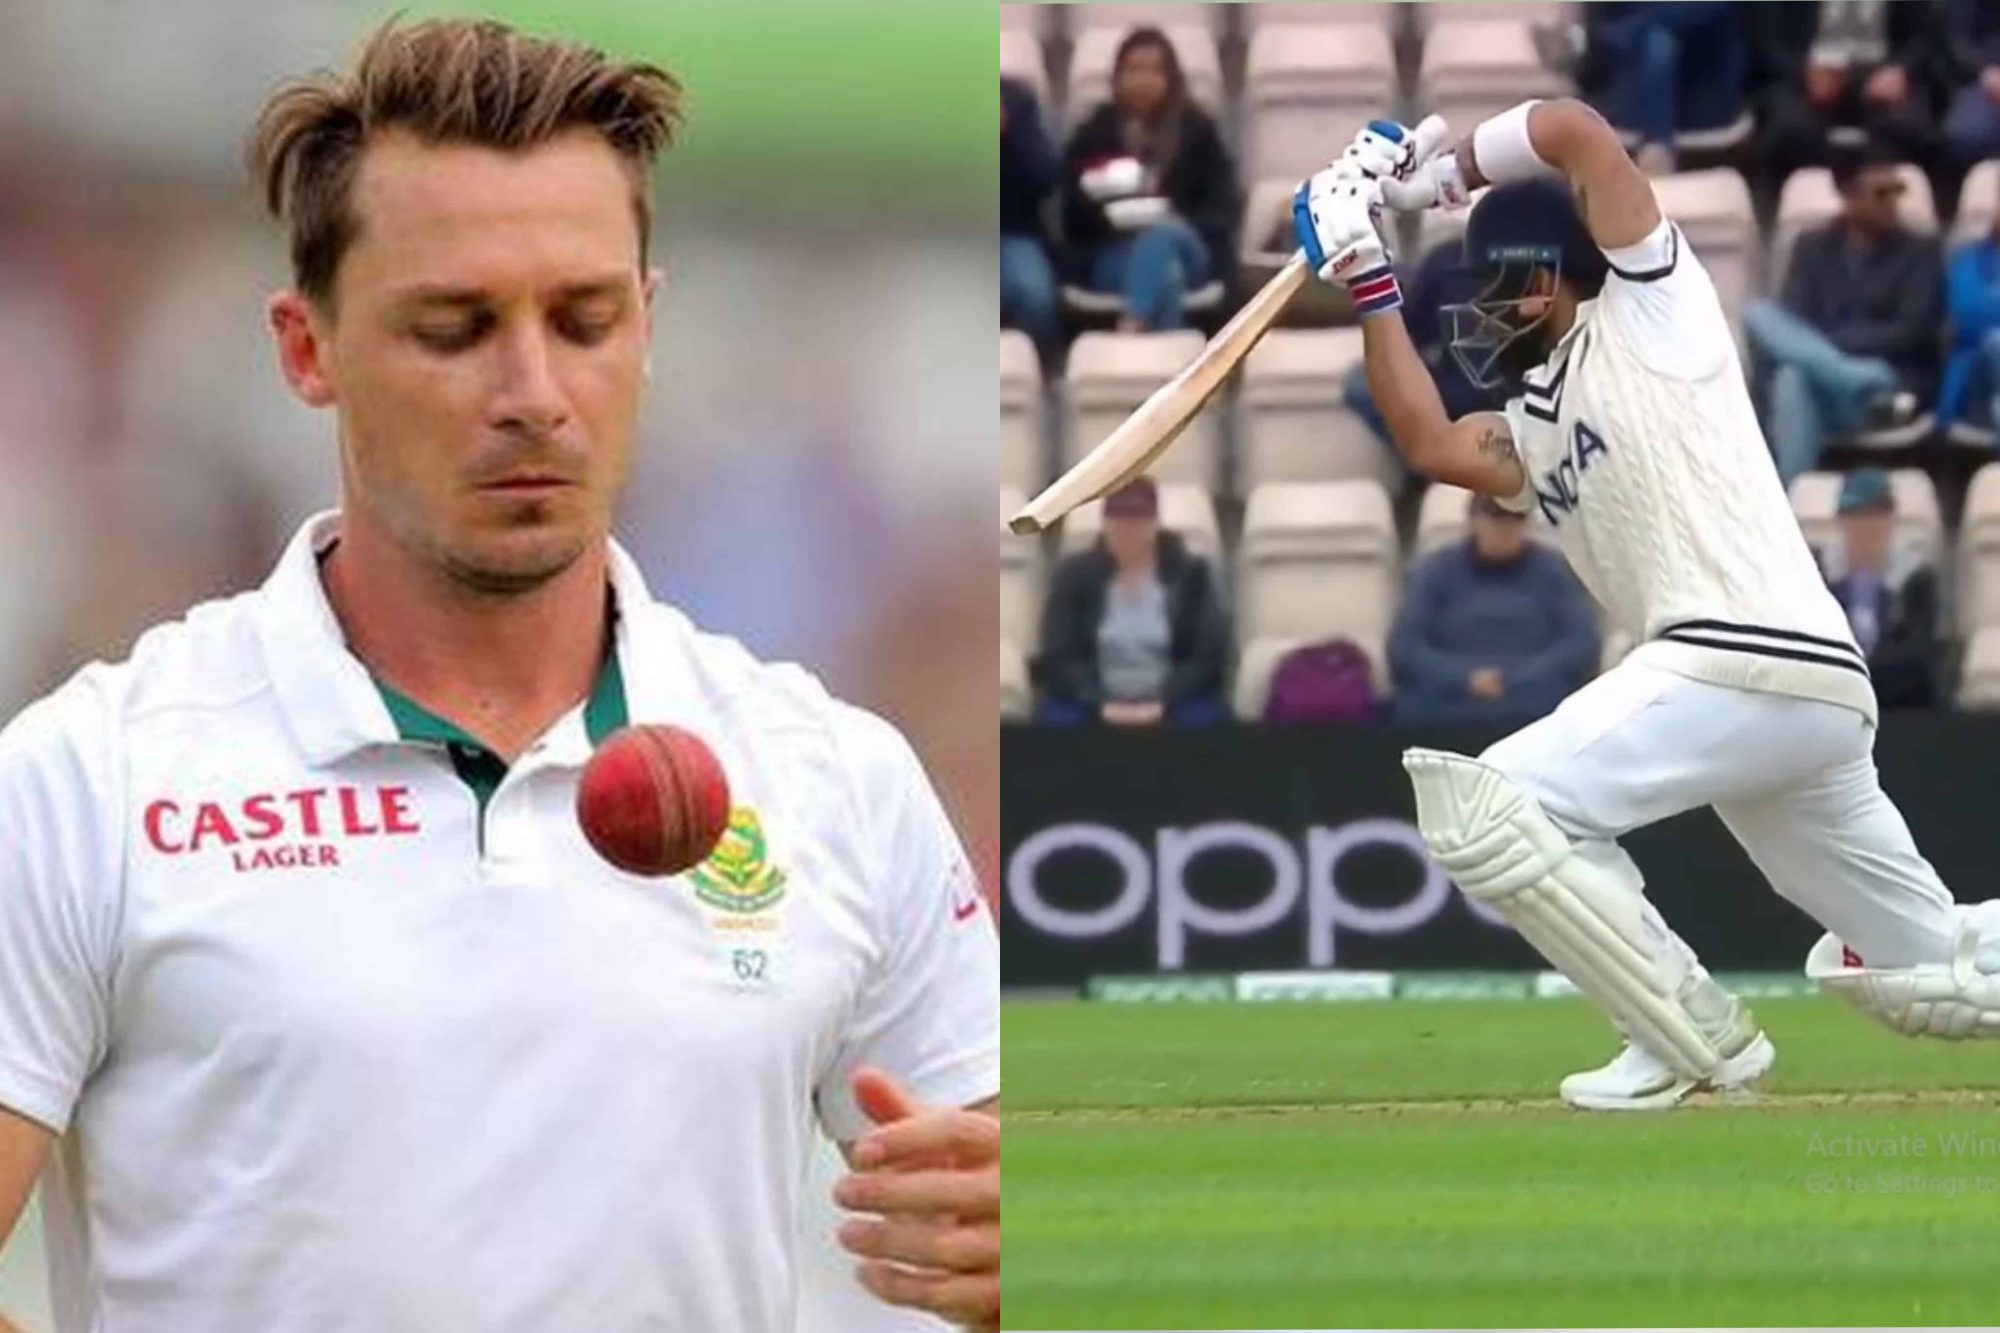 WTC Final: Dale Steyn Offers Tips And Advice To New Zealand Bowlers On How To Dismiss Virat Kohli